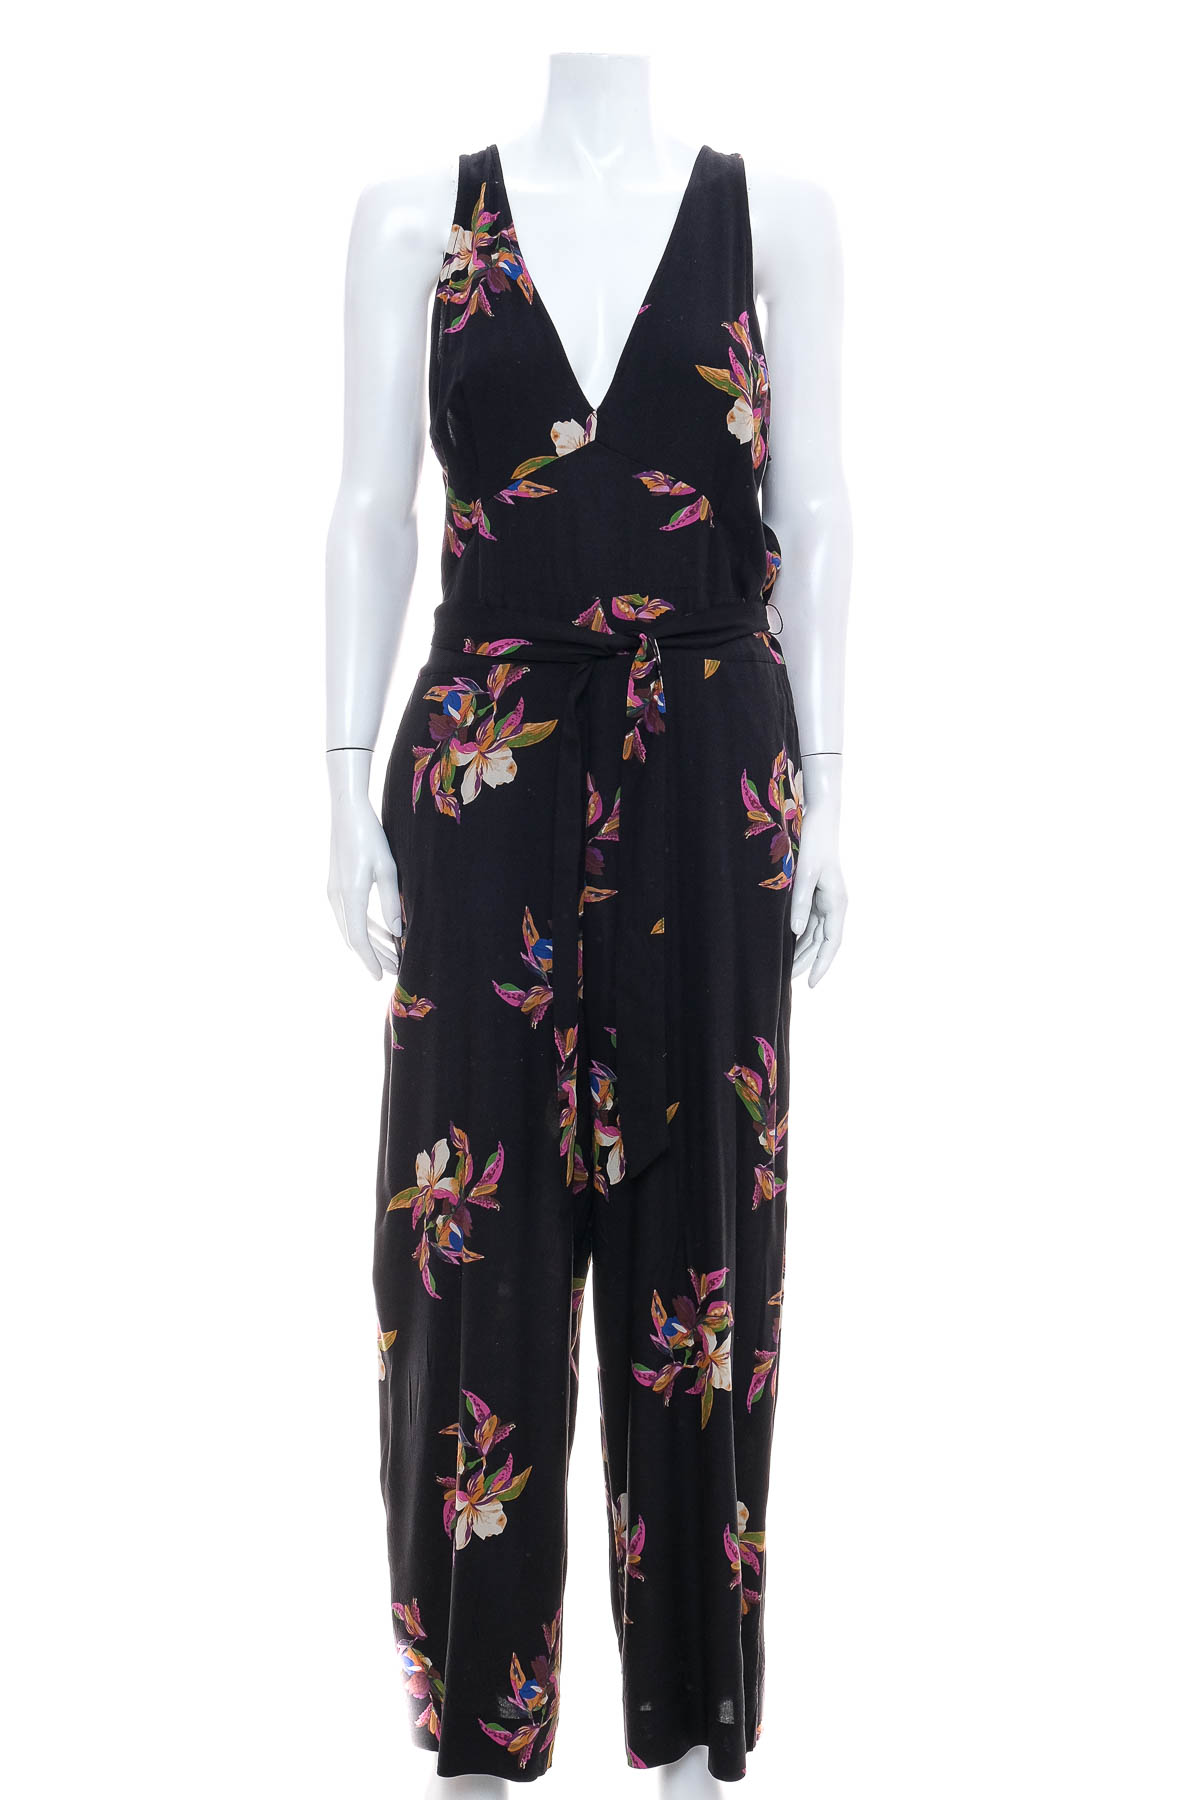 Women's jumpsuit - A new day - 0